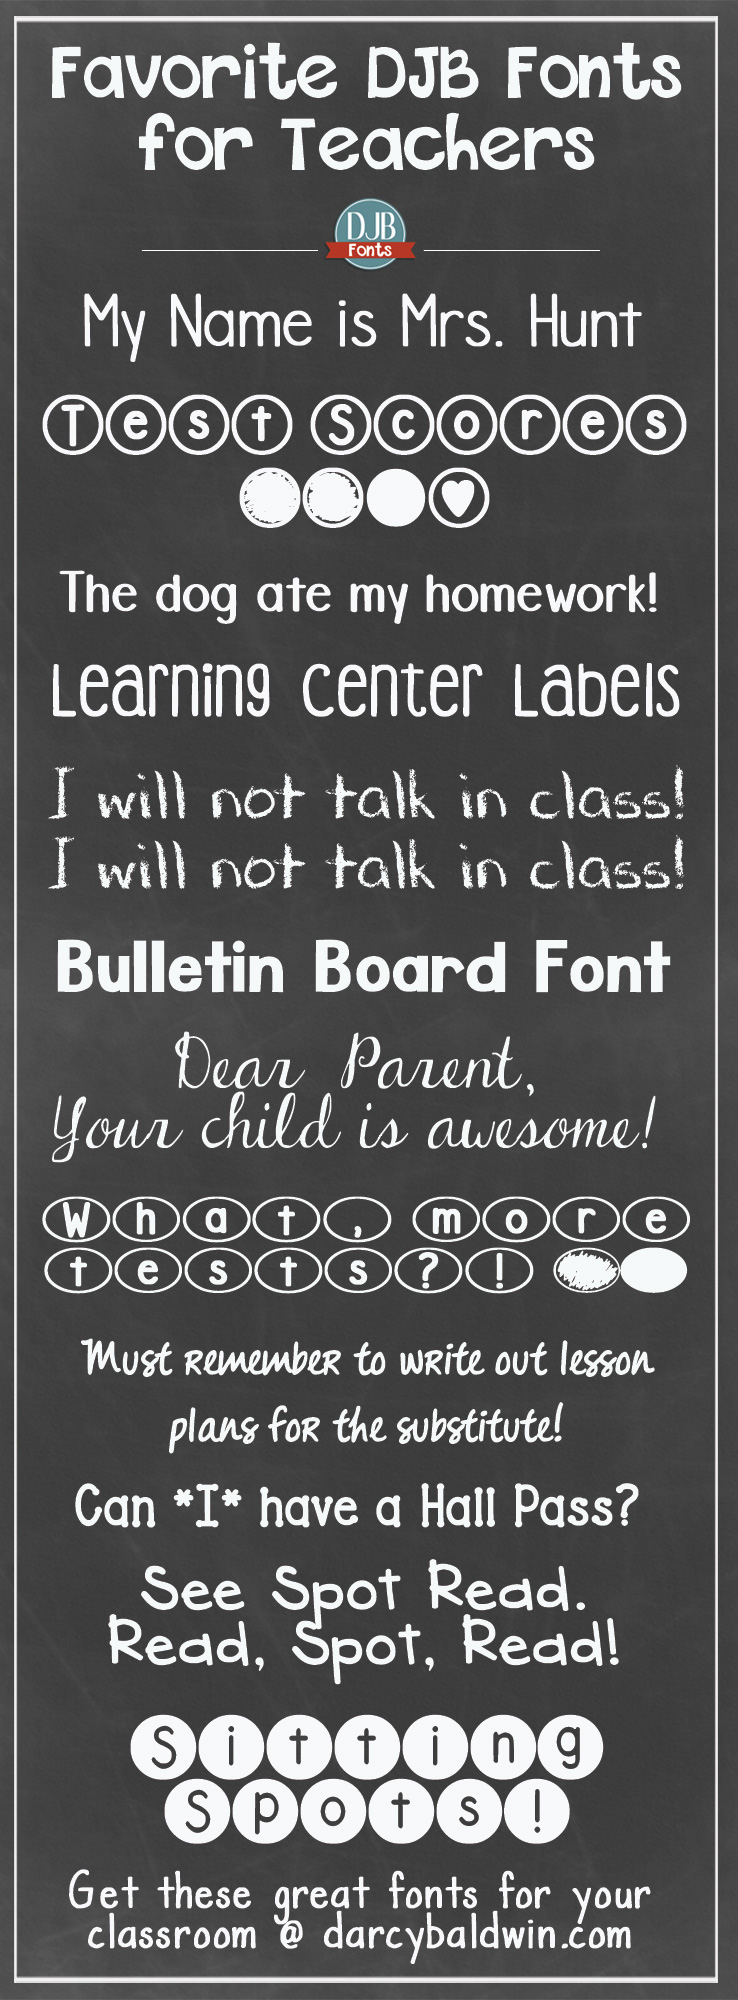 Back to School is just around the corner!! Here are some free "for the classroom" fonts for teachers from DJB Fonts. Which are your favorite teacher fonts?